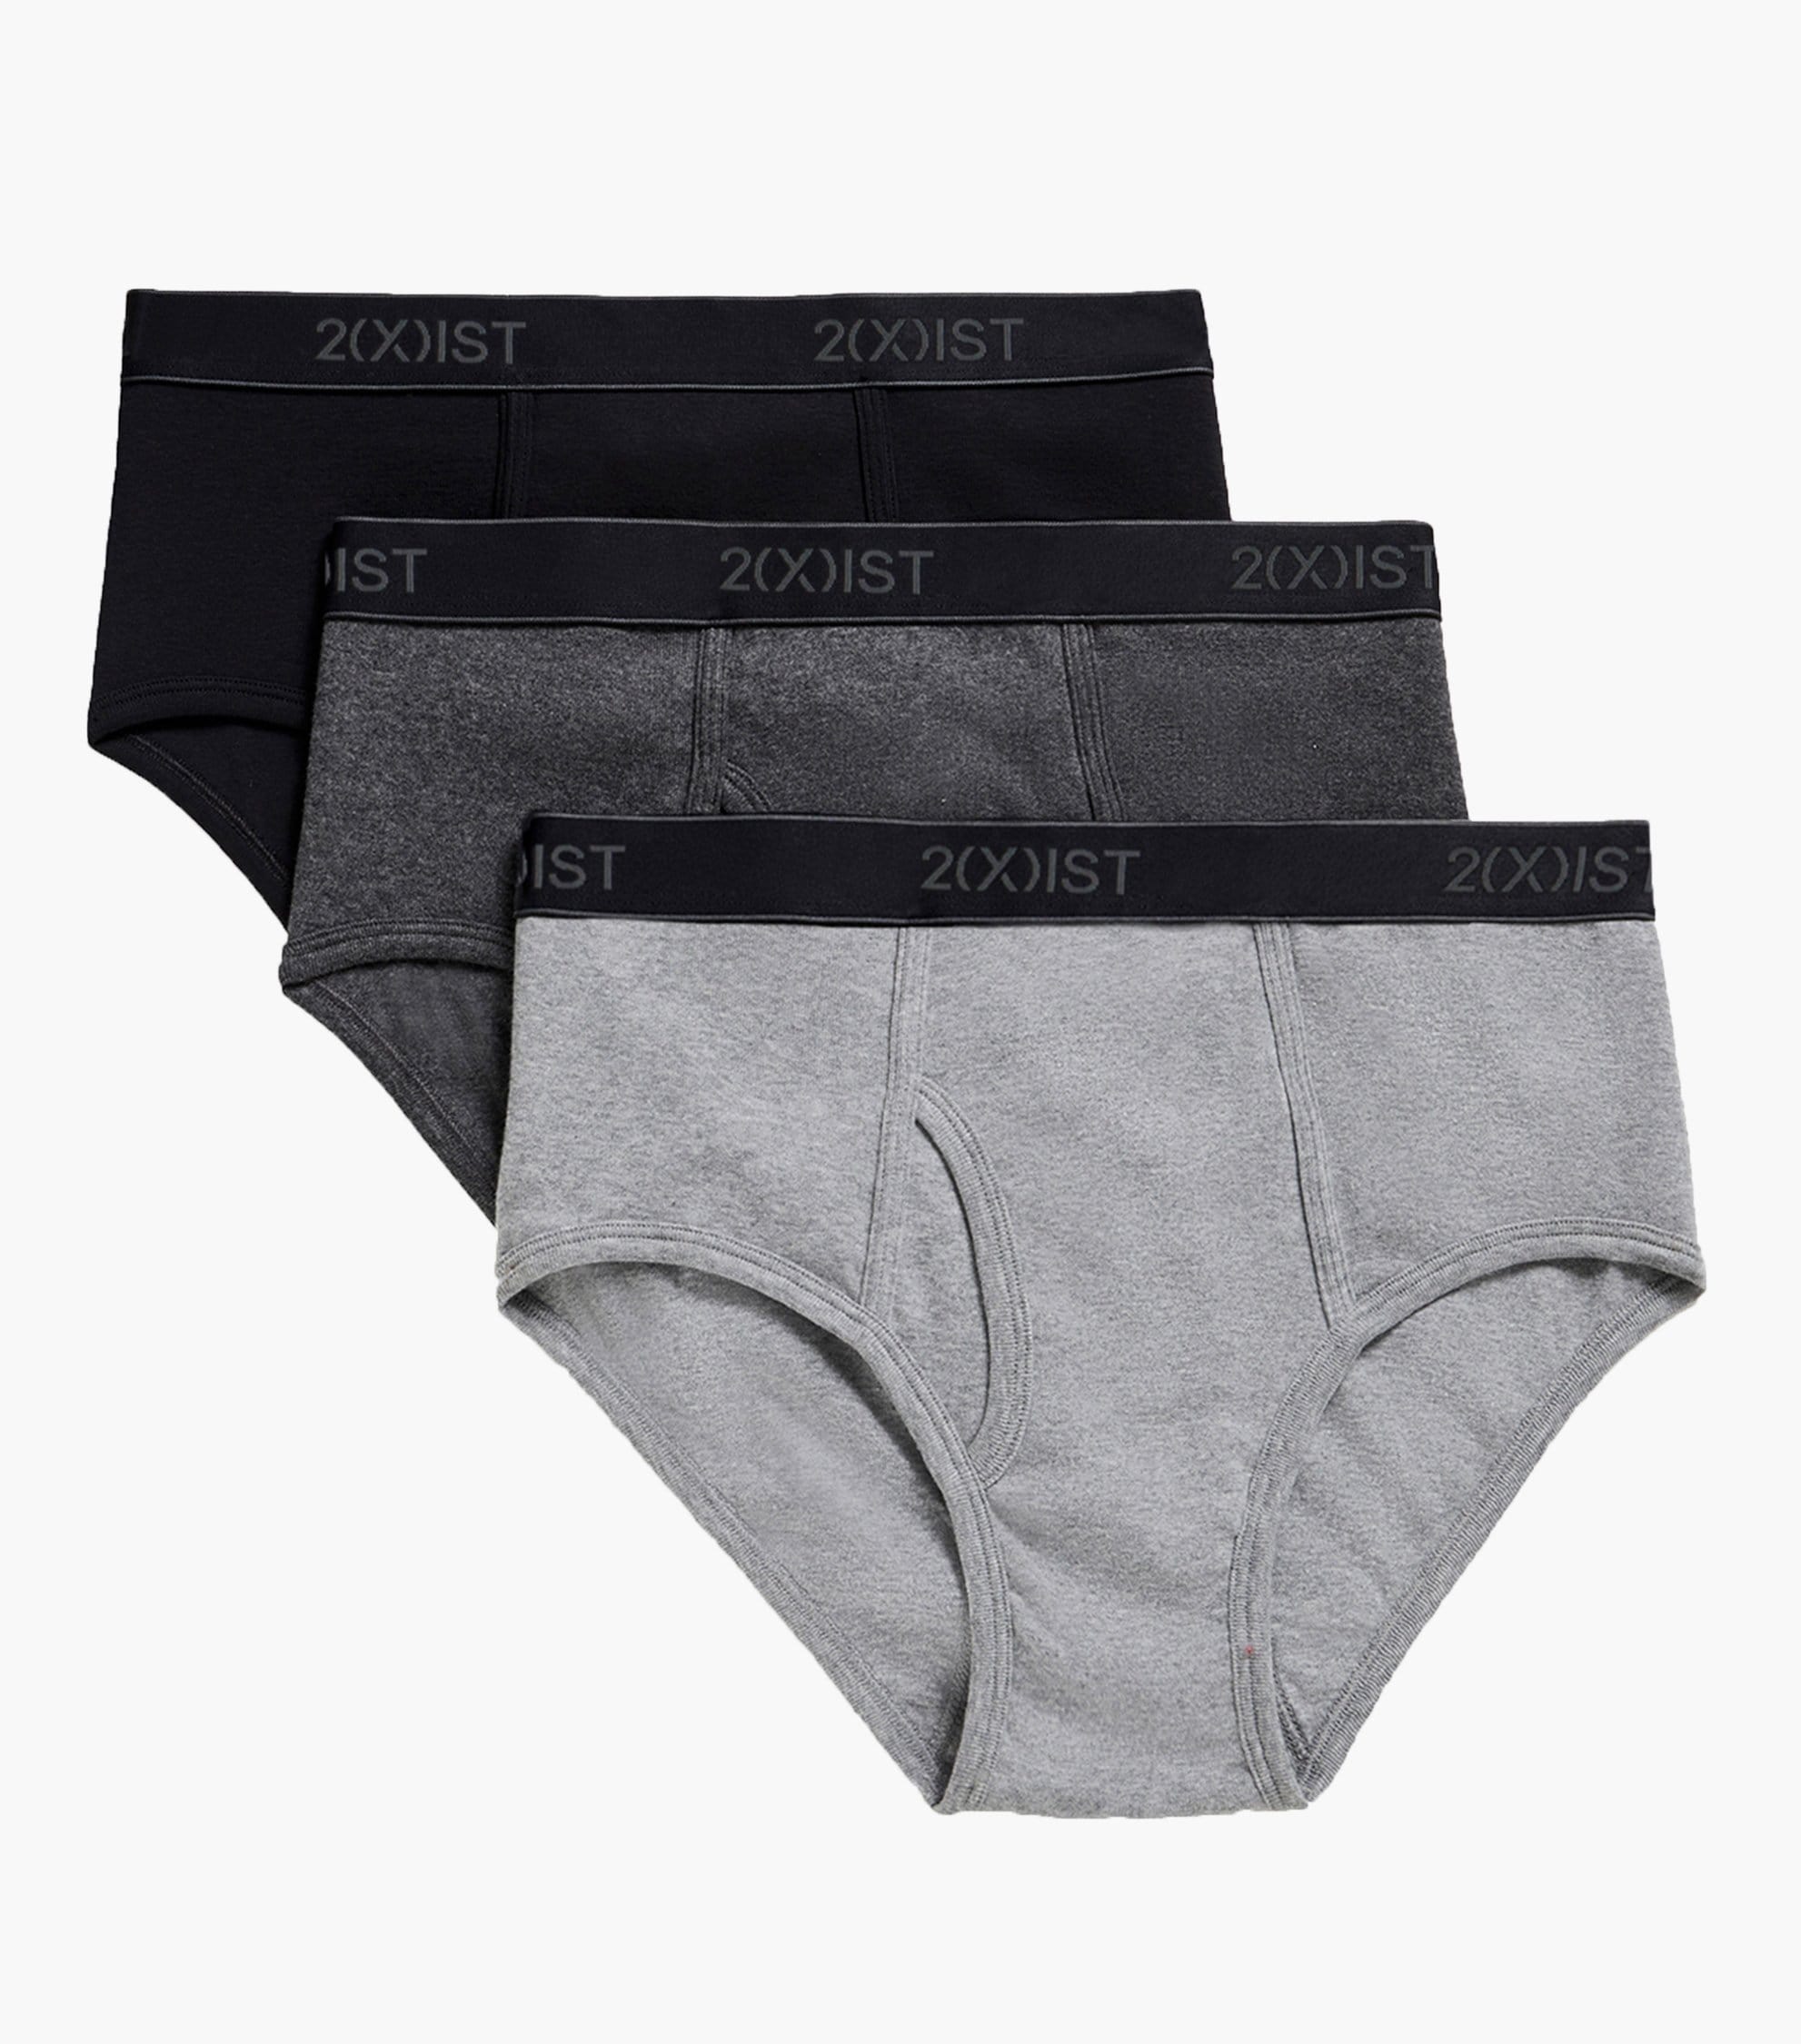 2(X)ist Men's Underwear: 3-Pack Essential Cotton Fly Front Brief $20,  4-Pack Cotton/Spandex Boxer Brief $22, 3-Pack Polyester No Show Trunk $16,  More + Free Shipping w/ Prime